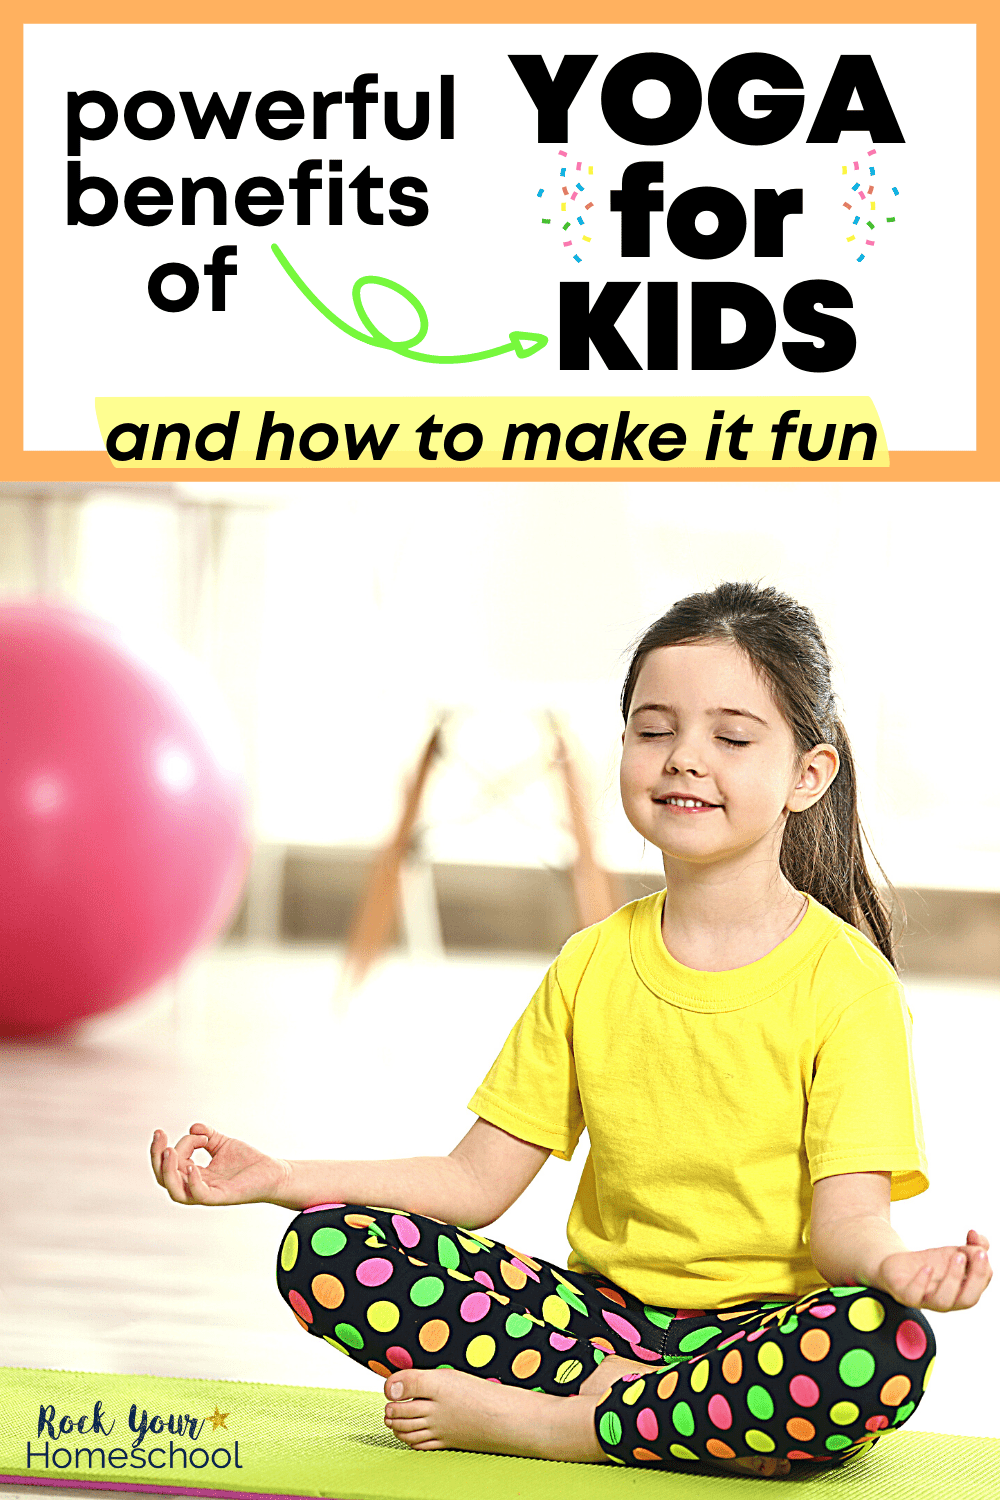 5 Powerful Benefits of Yoga for Kids (+ How to Easily Make It Fun)